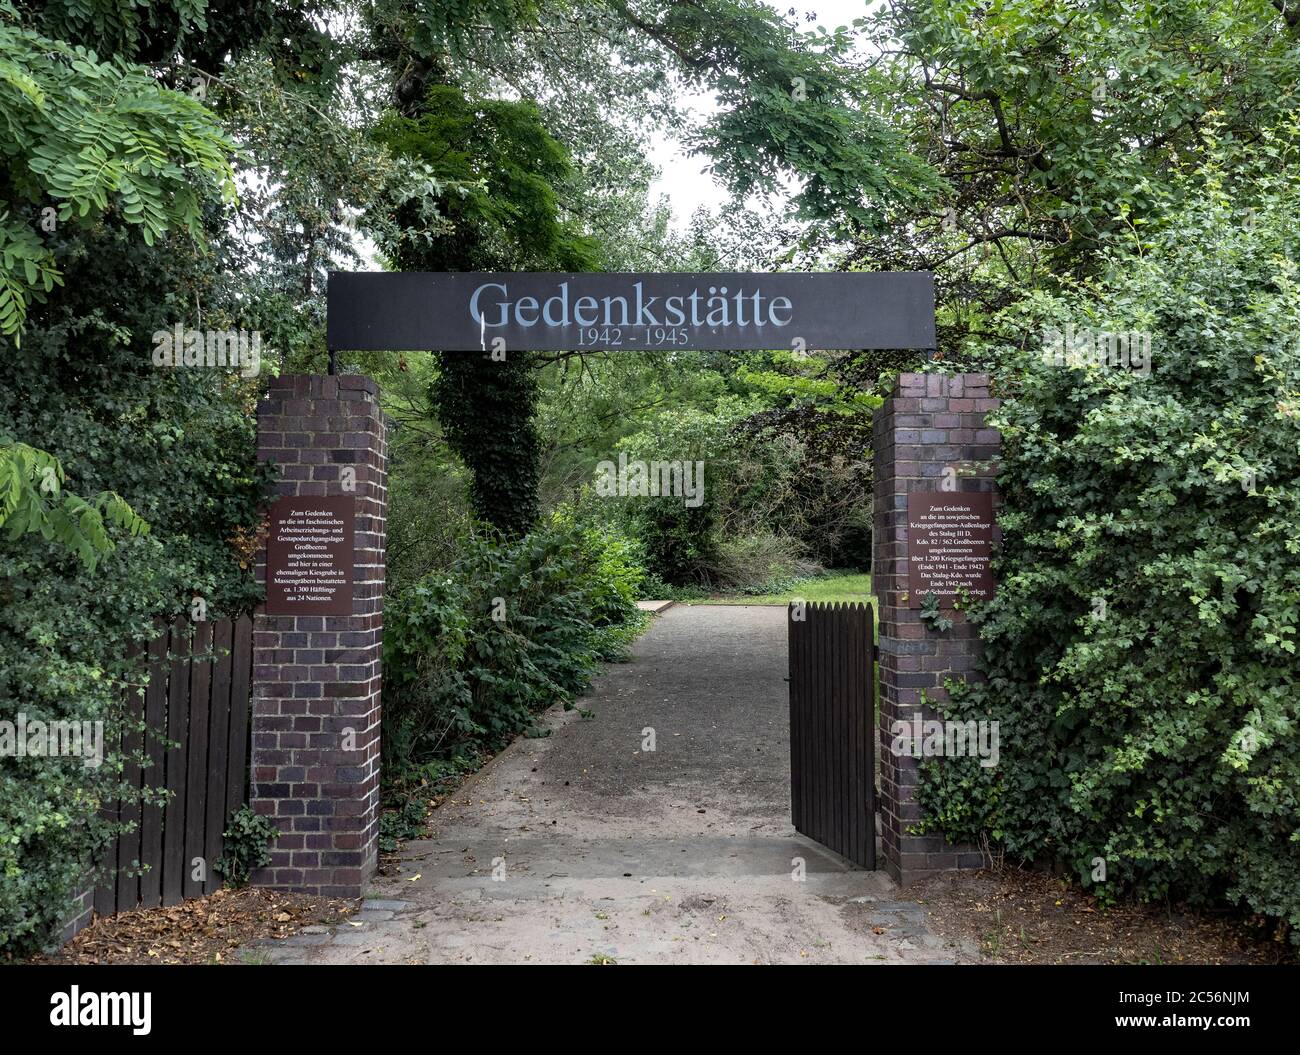 25 June 2020, Brandenburg, Großbeeren: The gates to the memorial for the victims of the former work education camp in Großbeeren, Brandenburg, are open. Between 1942 and 1945 1289 prisoners from 25 countries died there. Photo: Paul Zinken/dpa-Zentralbild/ZB Stock Photo